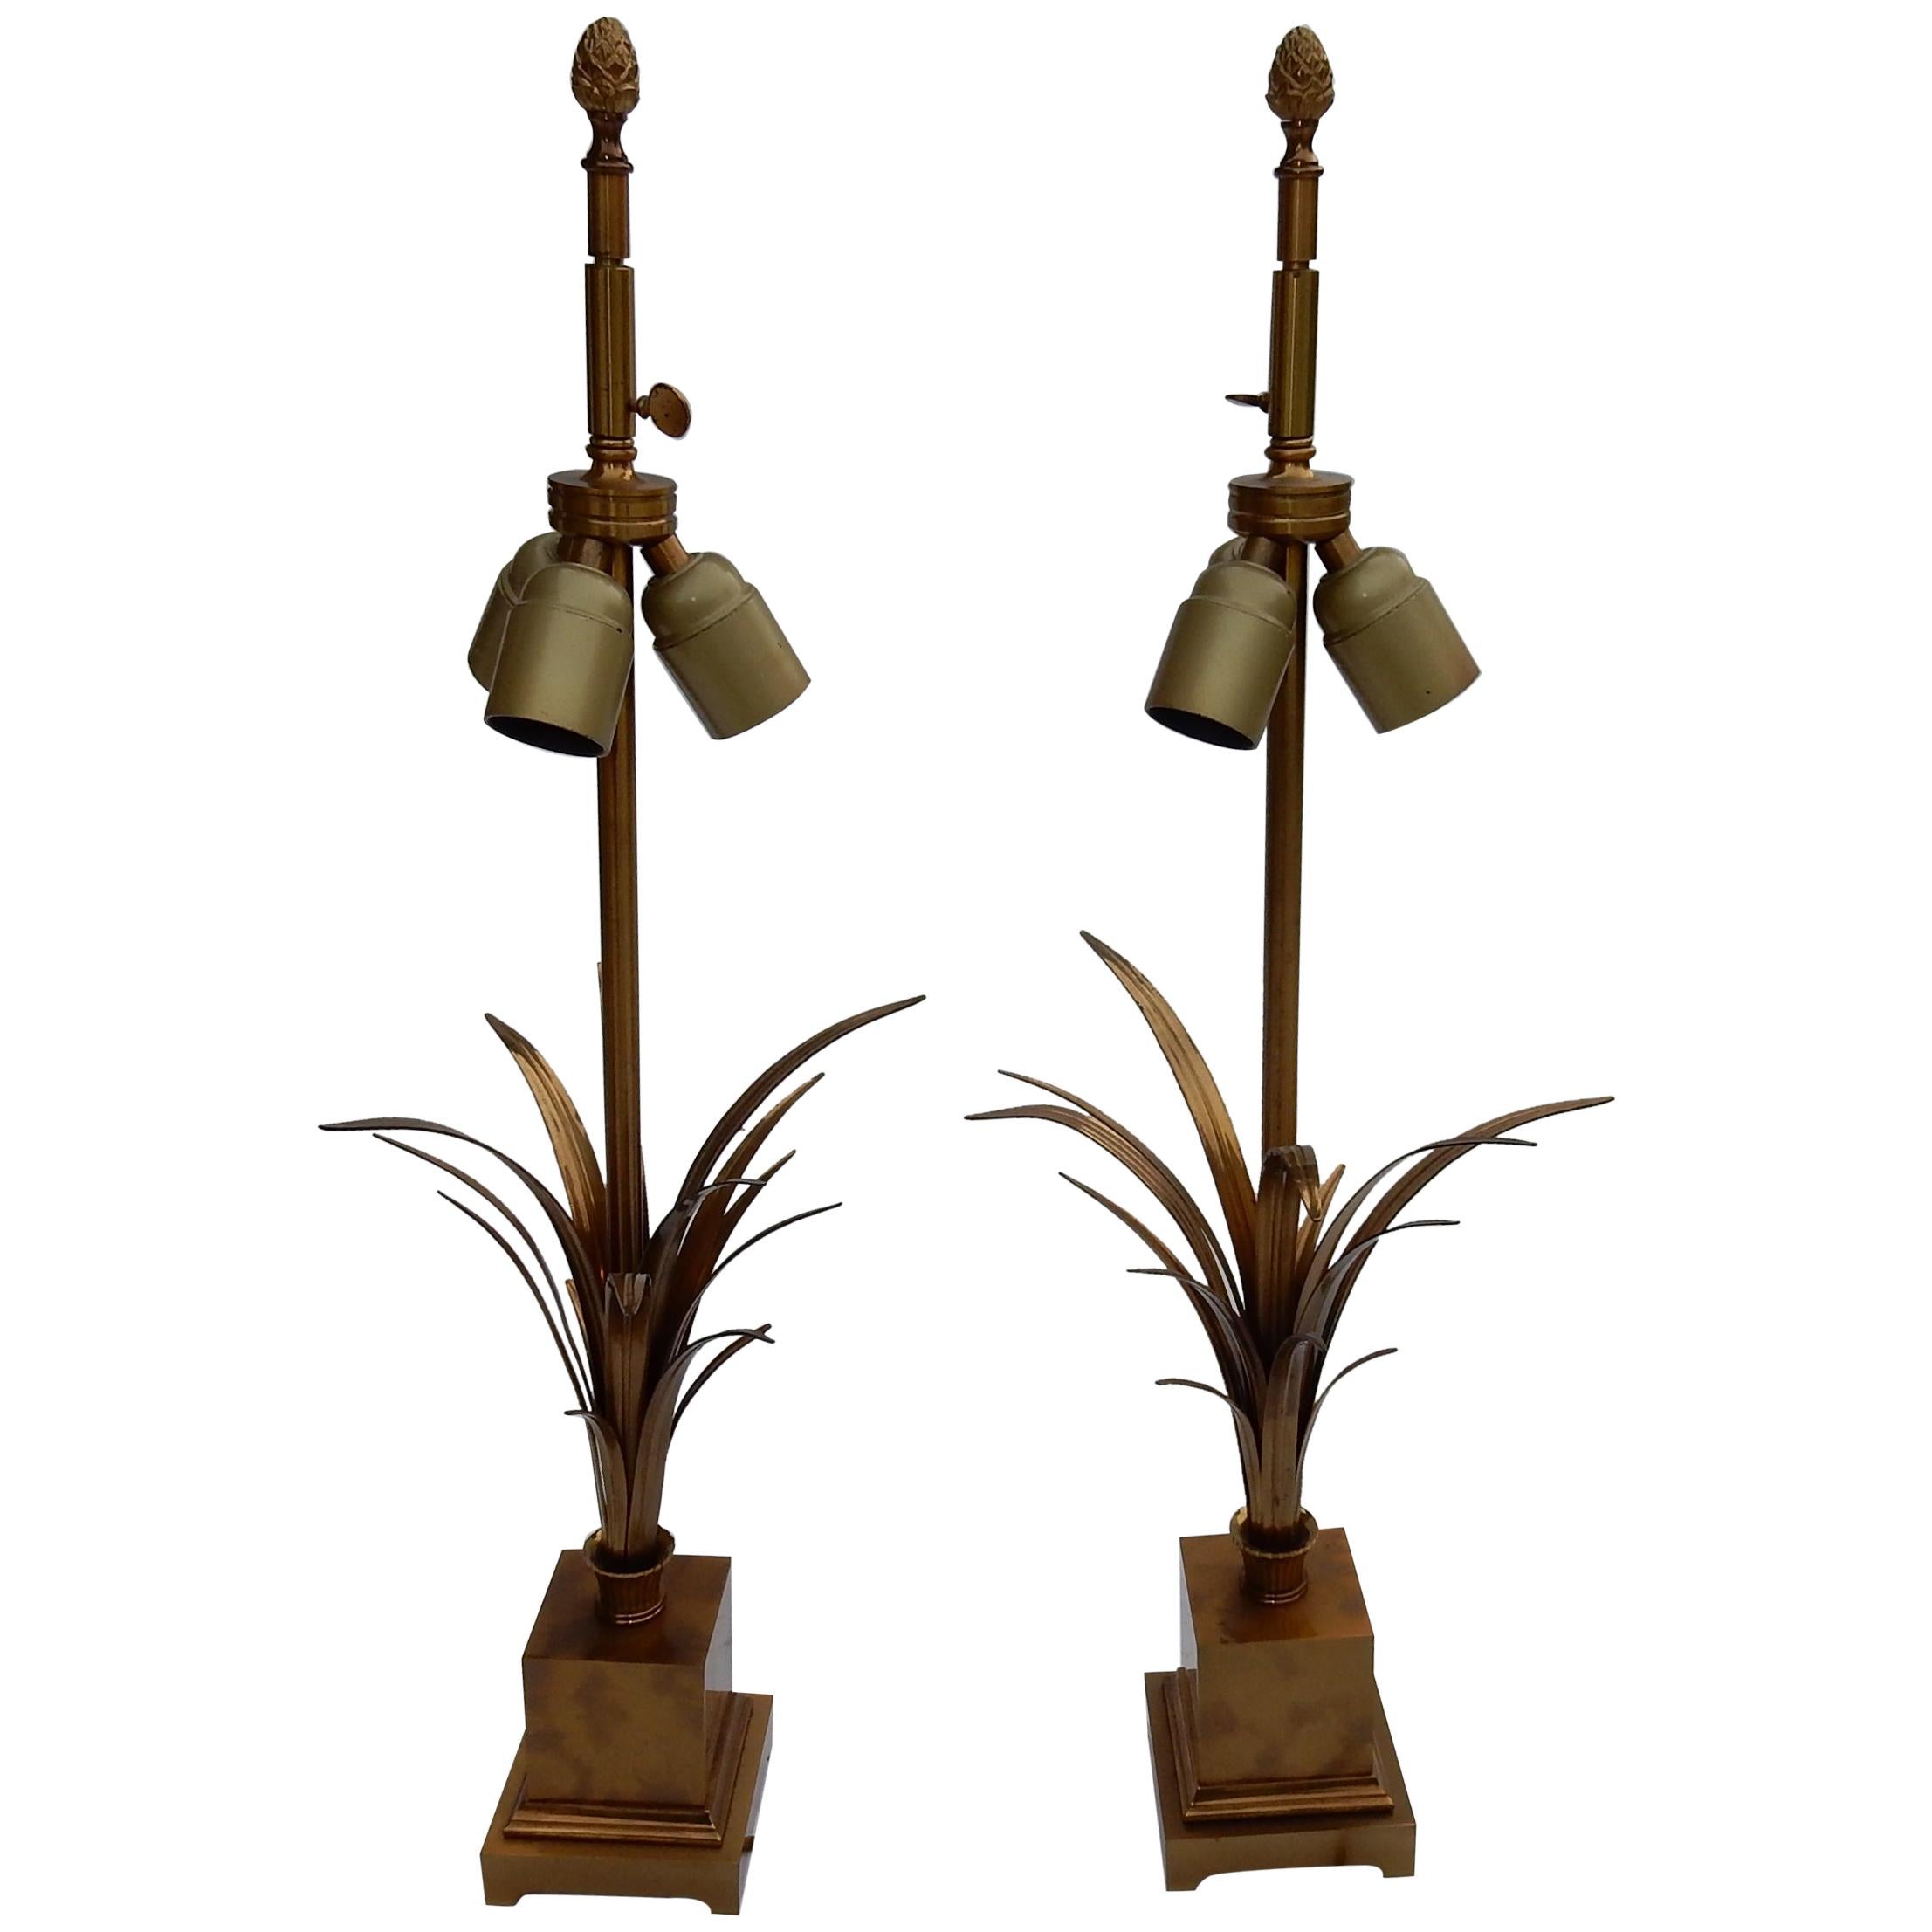 1950-1970 Pair of Reed Lamps in Brass and Gilt Bronze Signed Charles